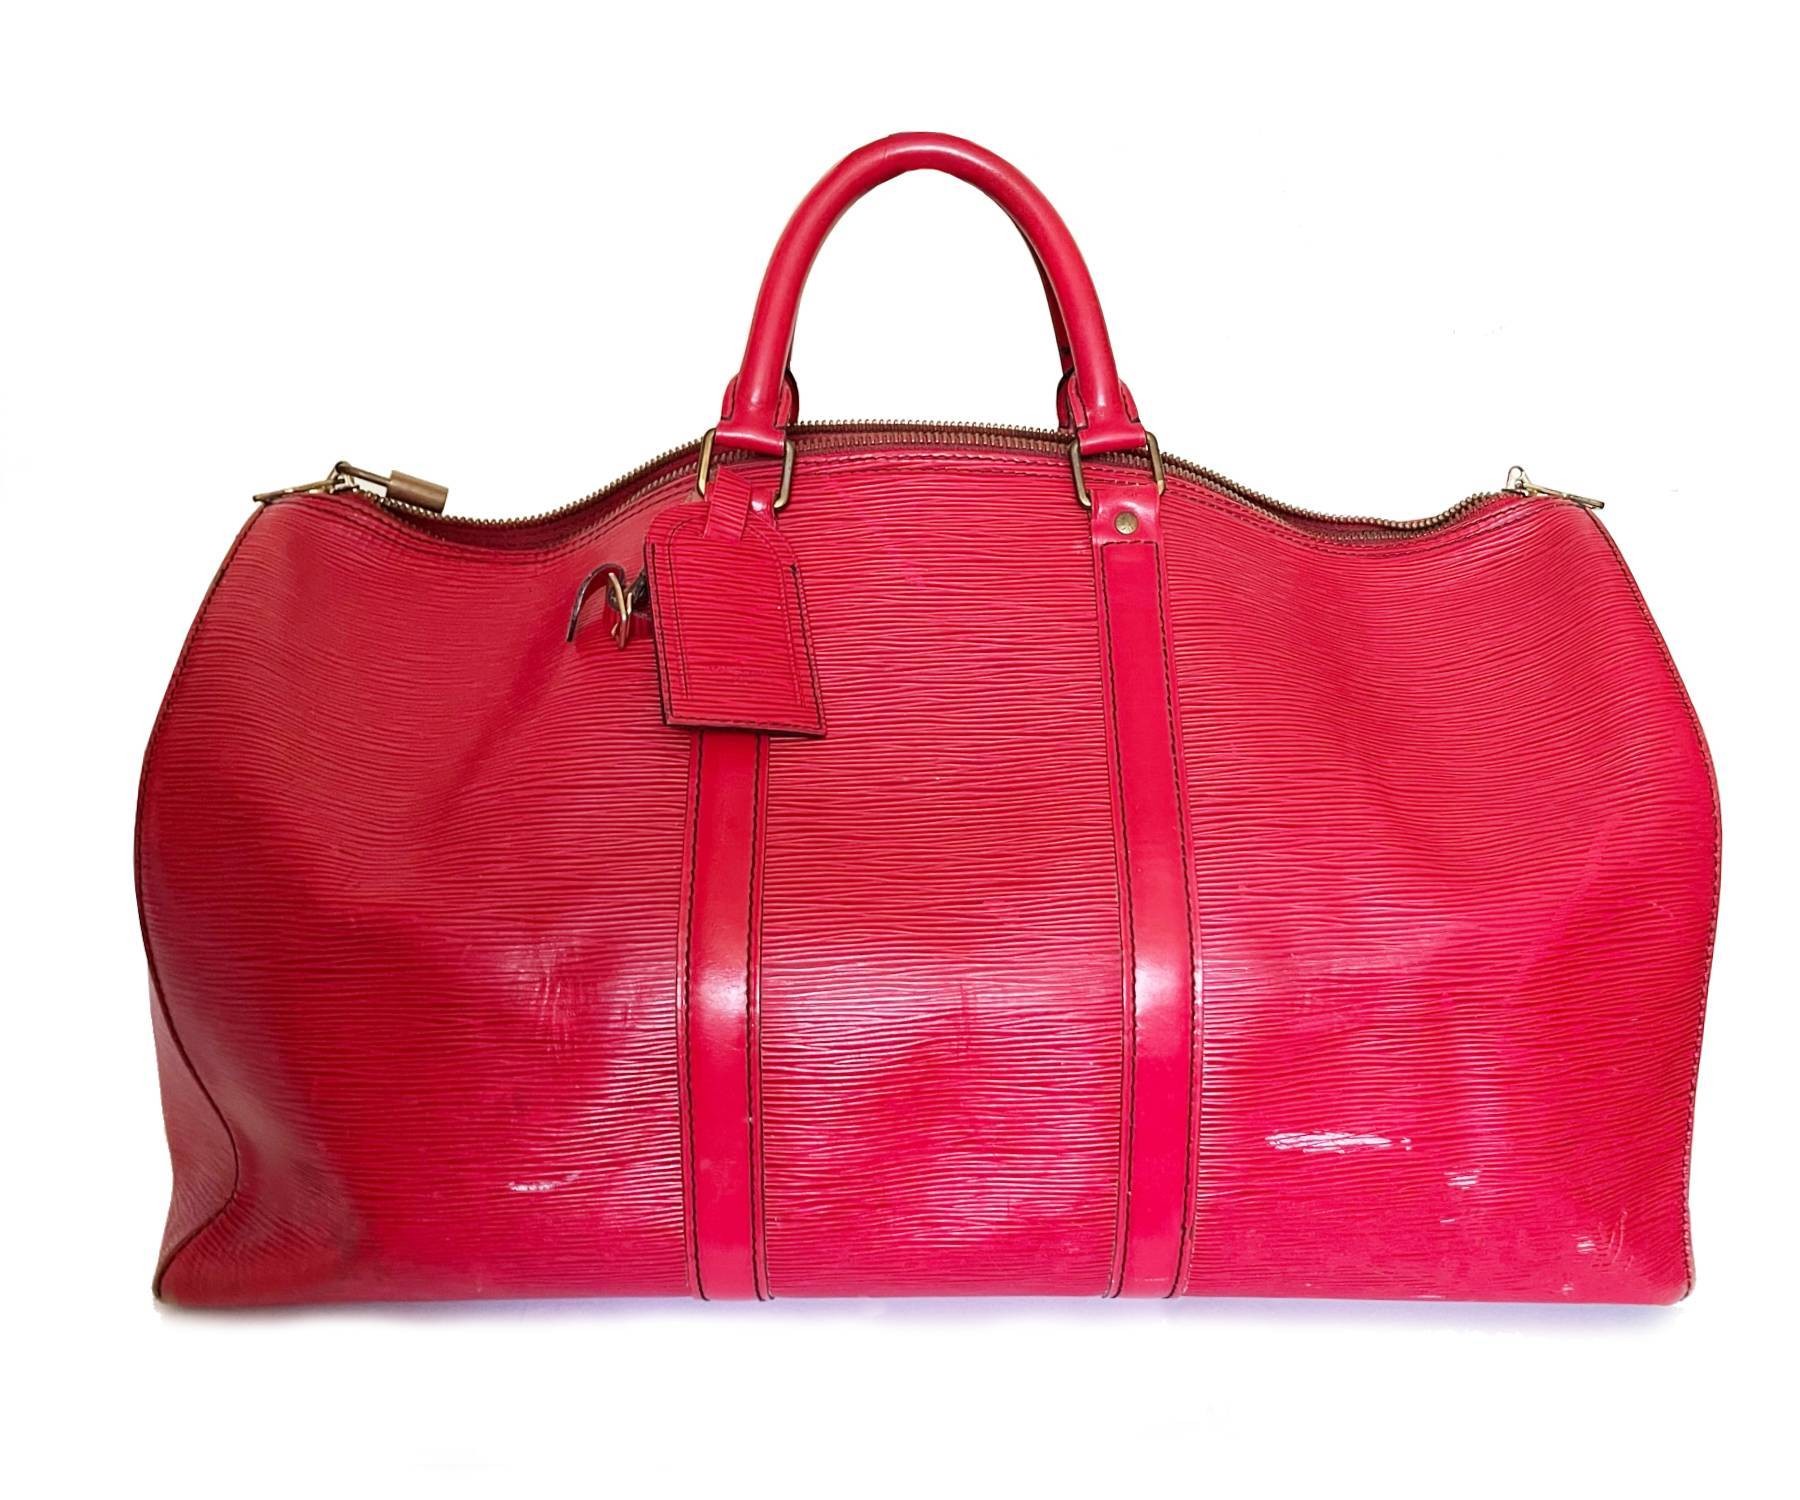 Sold at Auction: Vintage Louis Vuitton Keepall 45 Duffel Bag